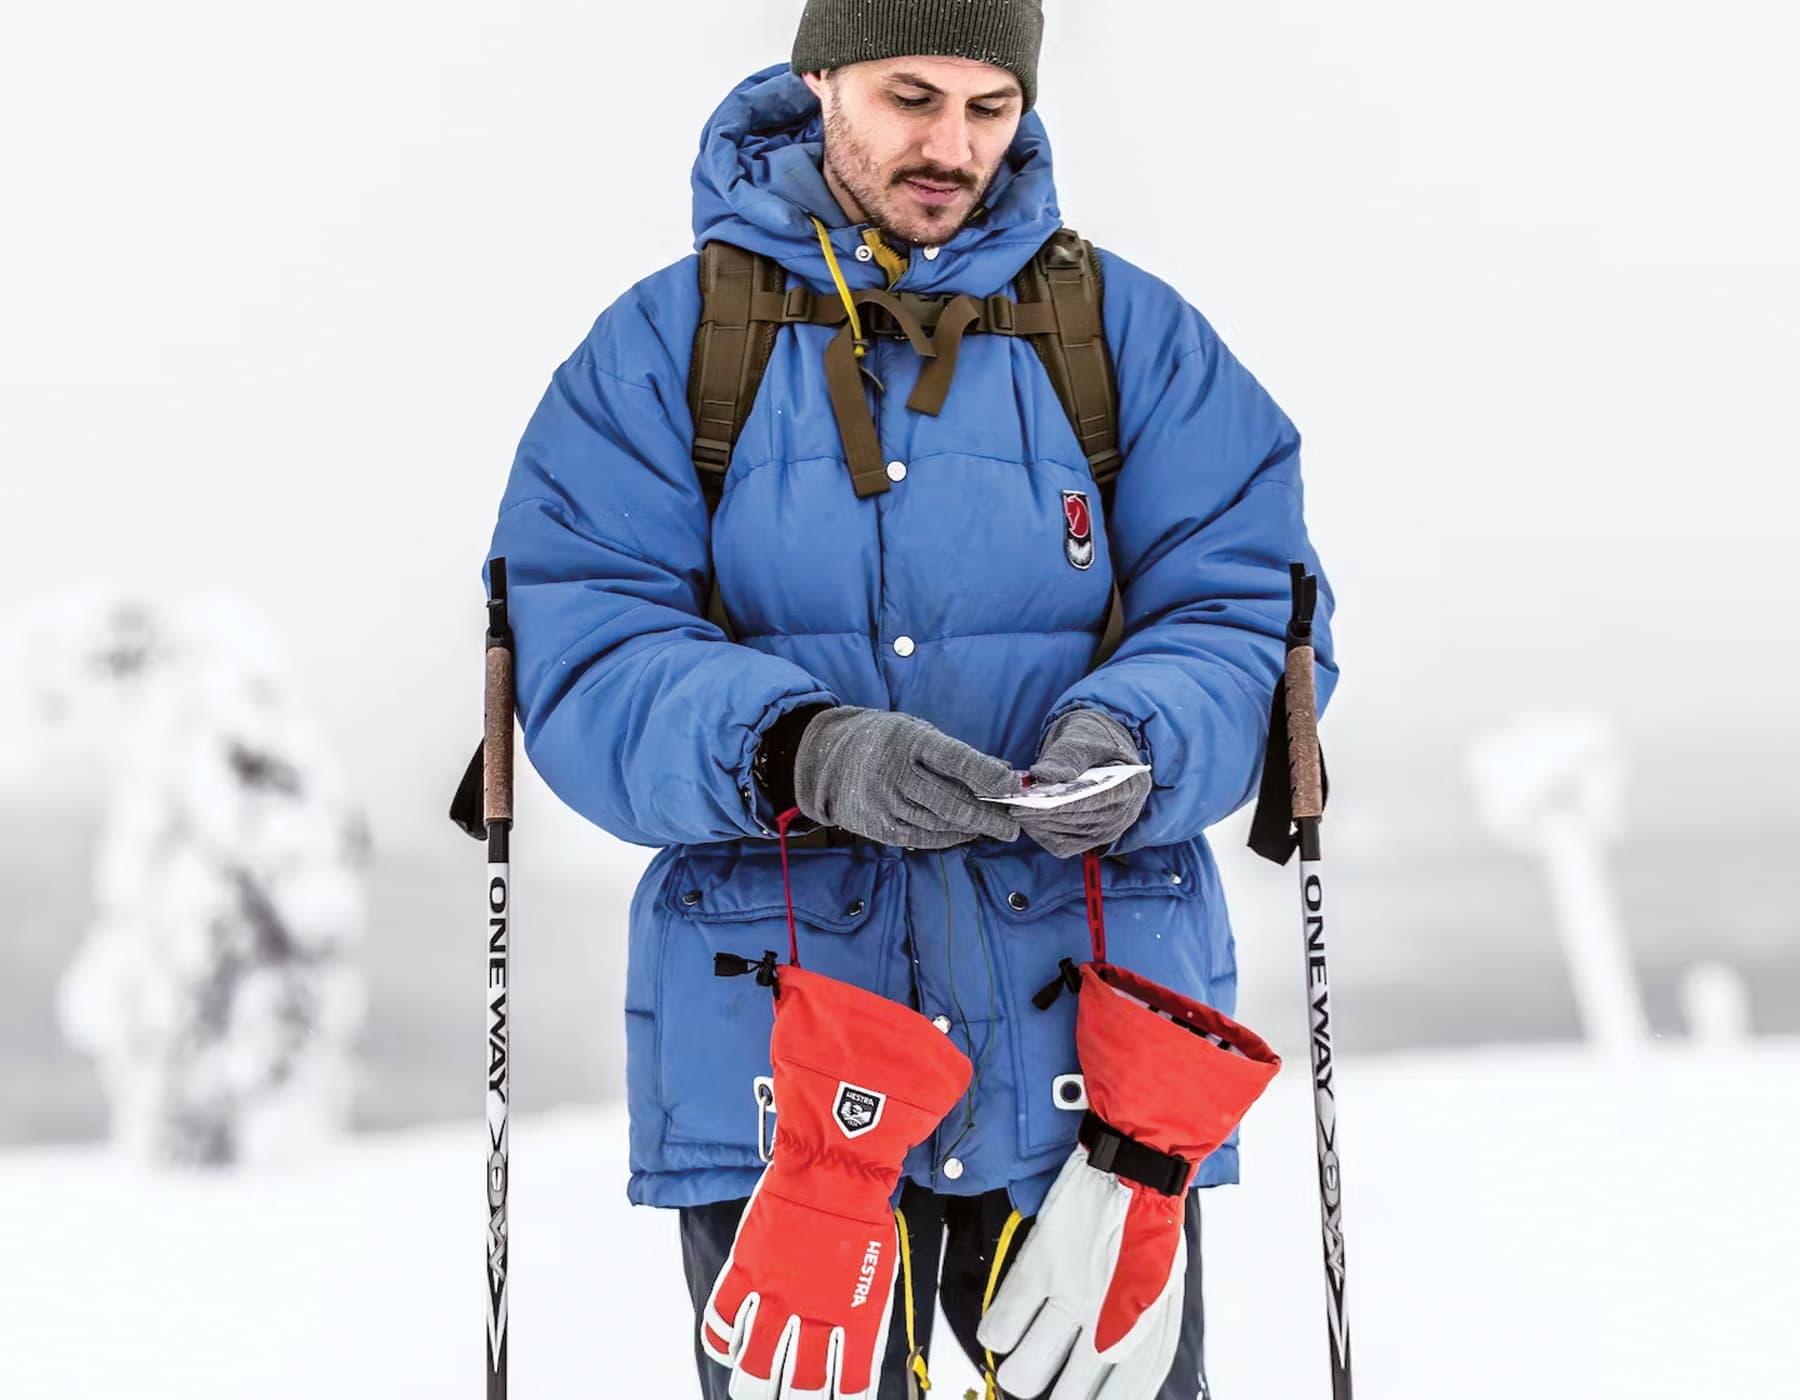 A skier in a blue jackets standing in the snow with 2 poles and a backpack. He is looking at a piece of paper while a pair of red Hestra gloves hangs from his wrists. 